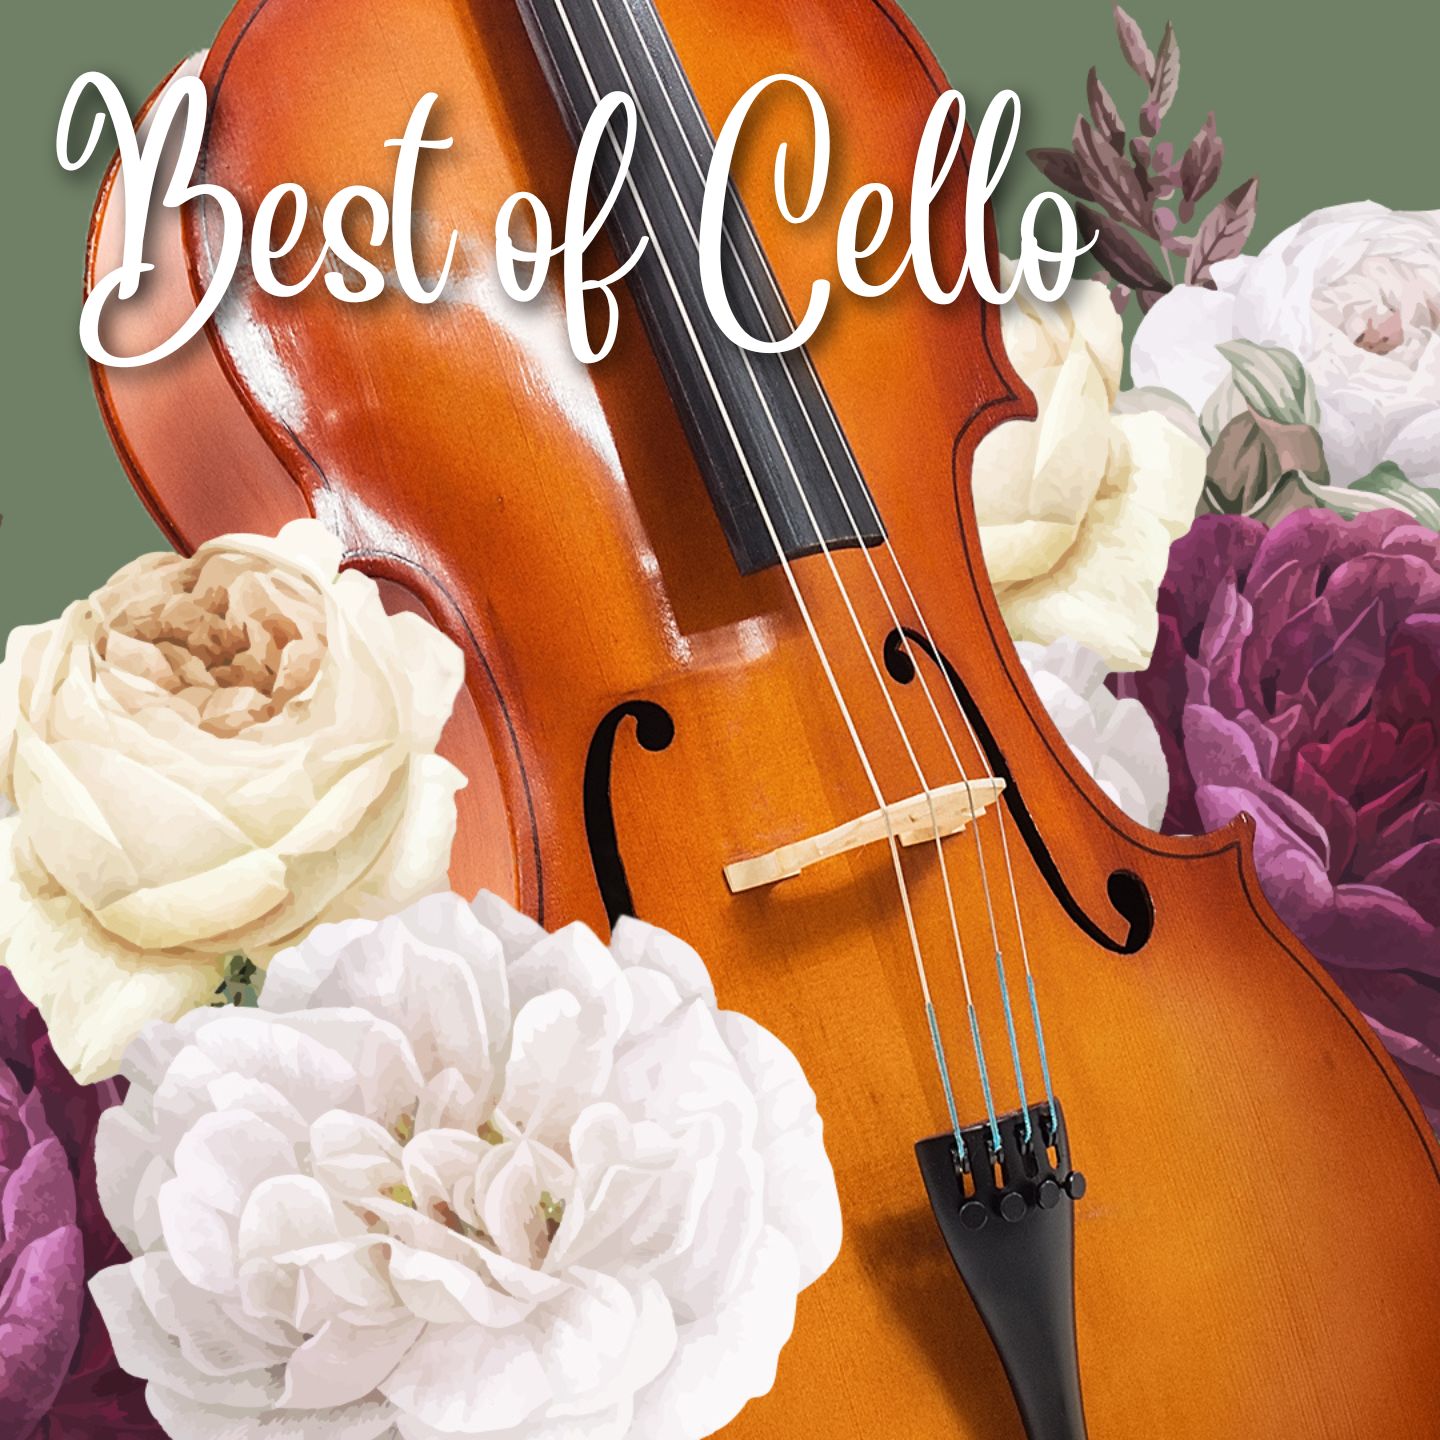 The Best of Cello